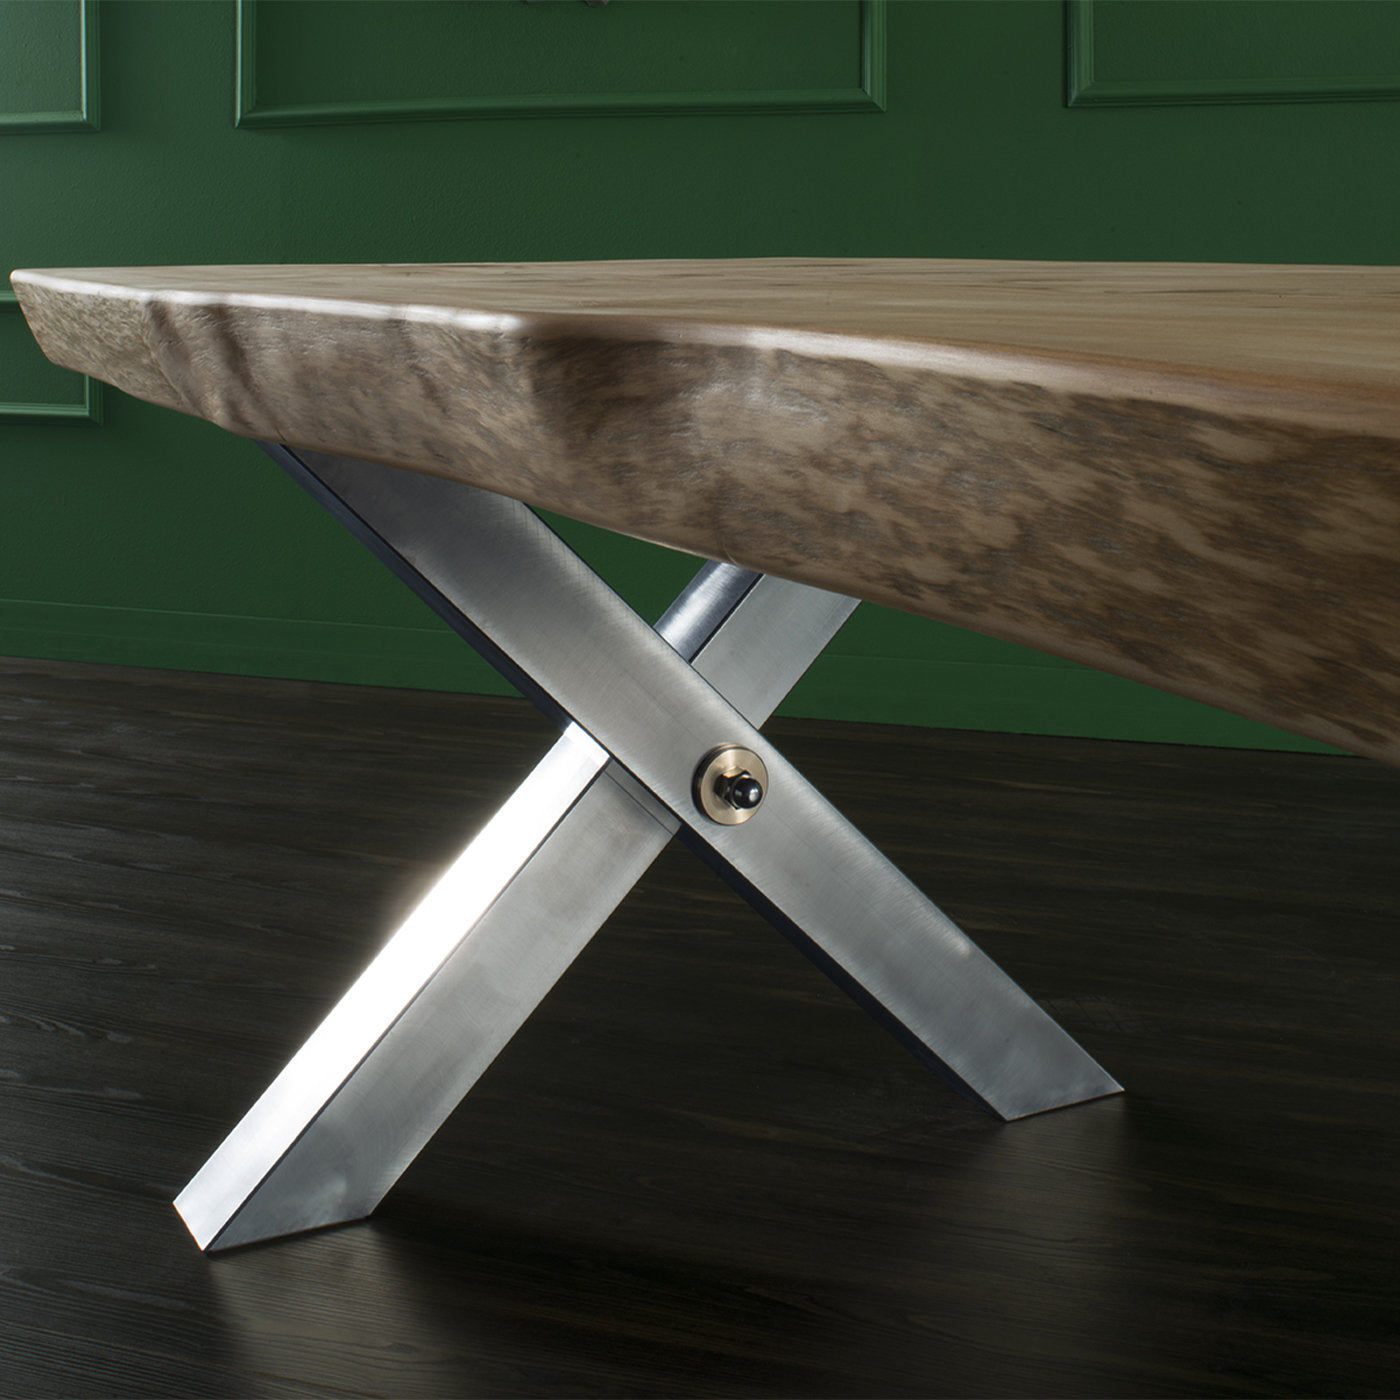 Xperx Dining Table - Alternative view 2